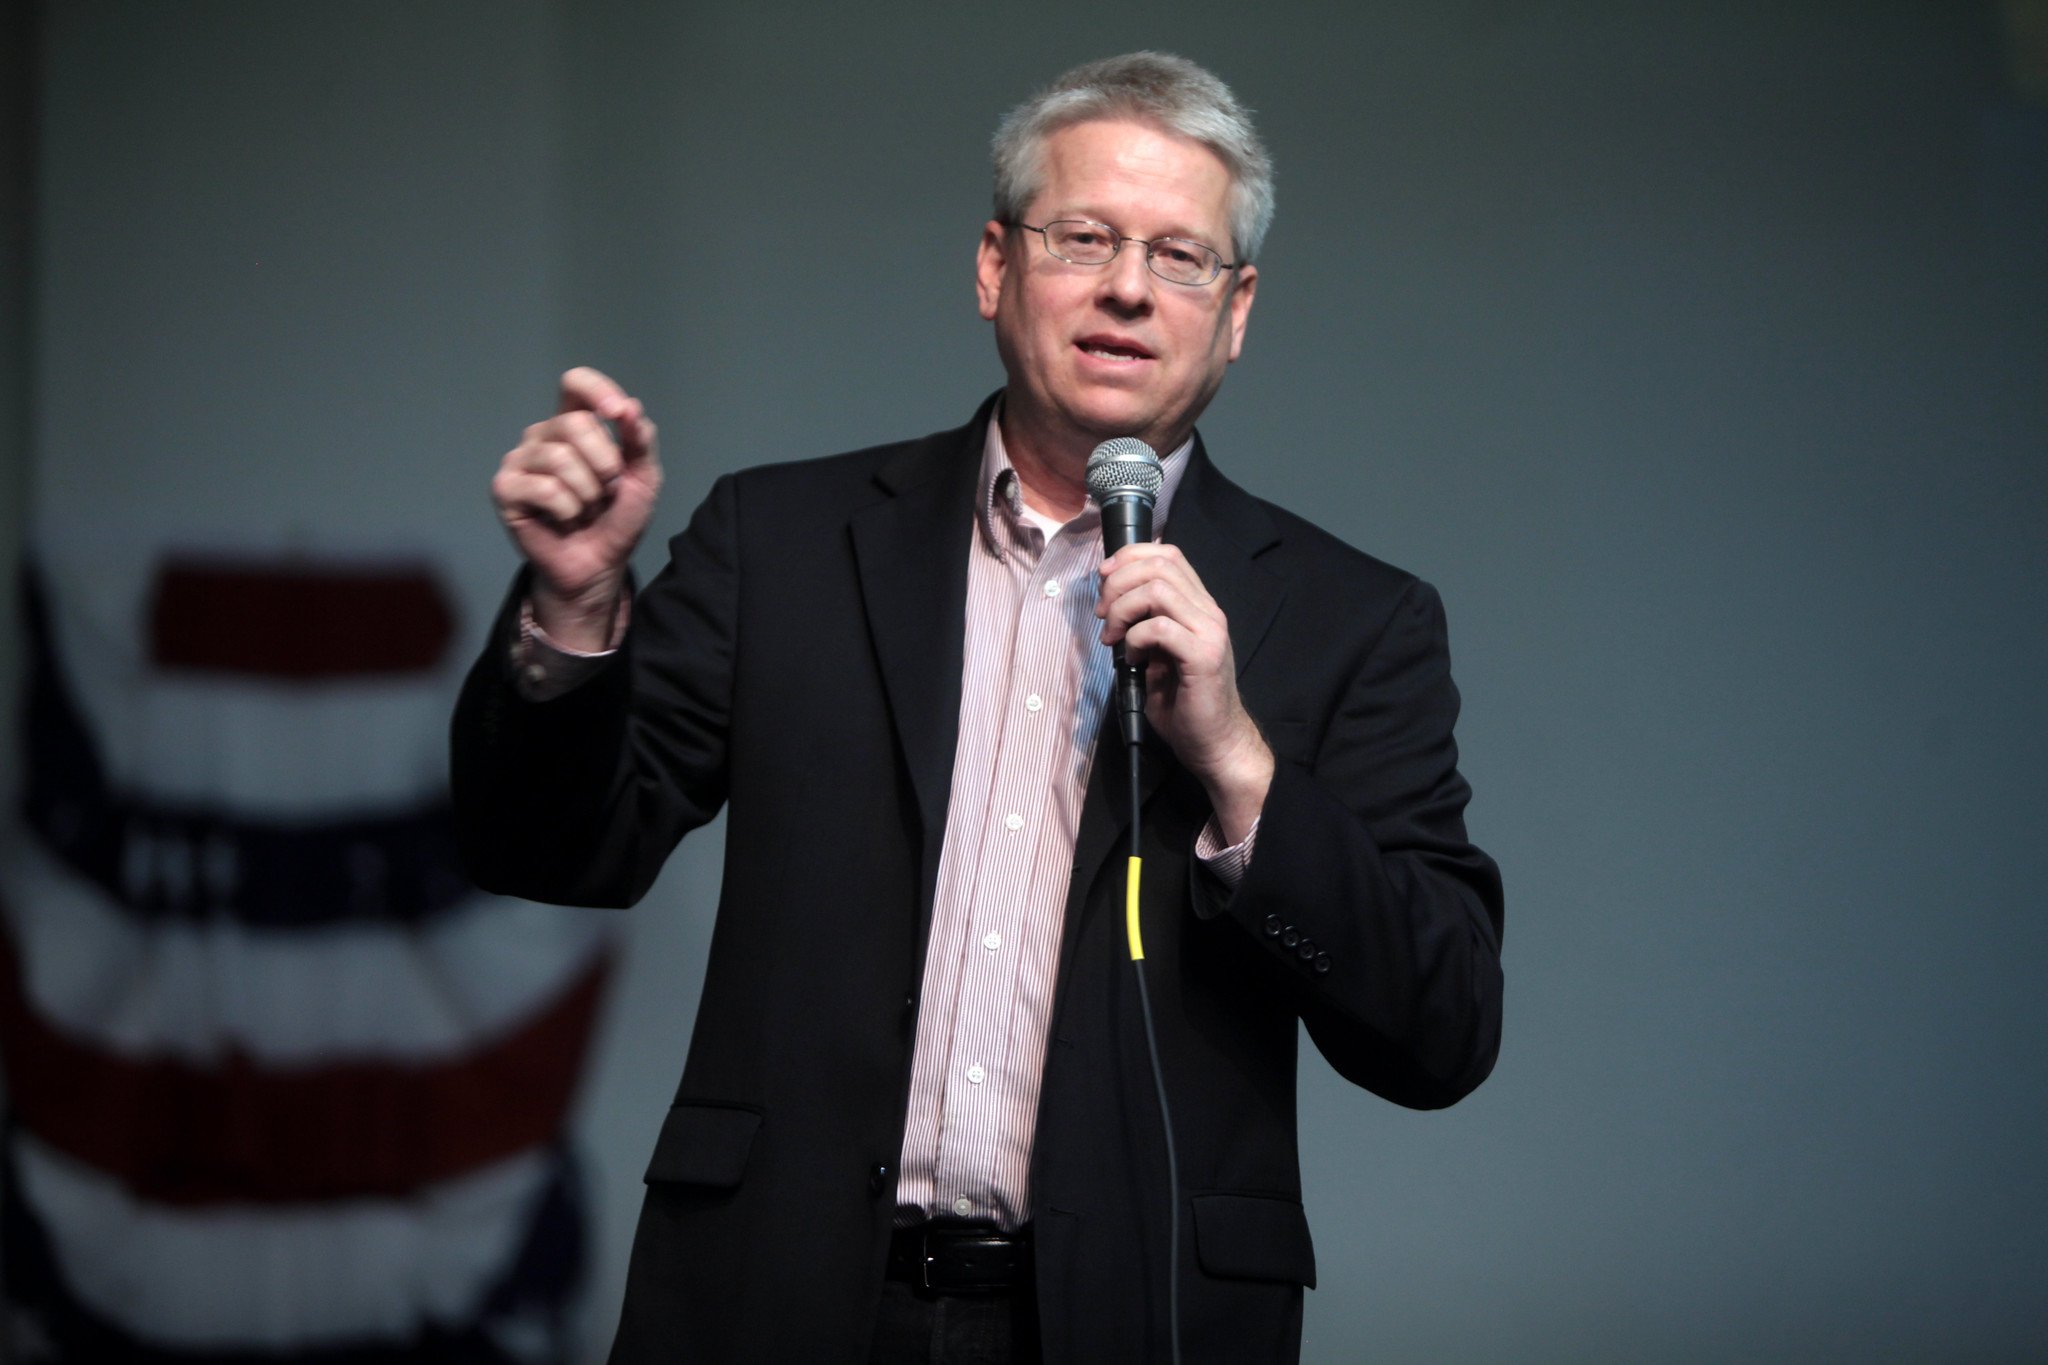 State Representative Eddie Farnsworth speaking at a town hall hosted by the American Academy for Constitutional Education (AAFCE) at the Burke Basic School in Mesa, Arizona. 2014. (Photo: Gage Skidmore)